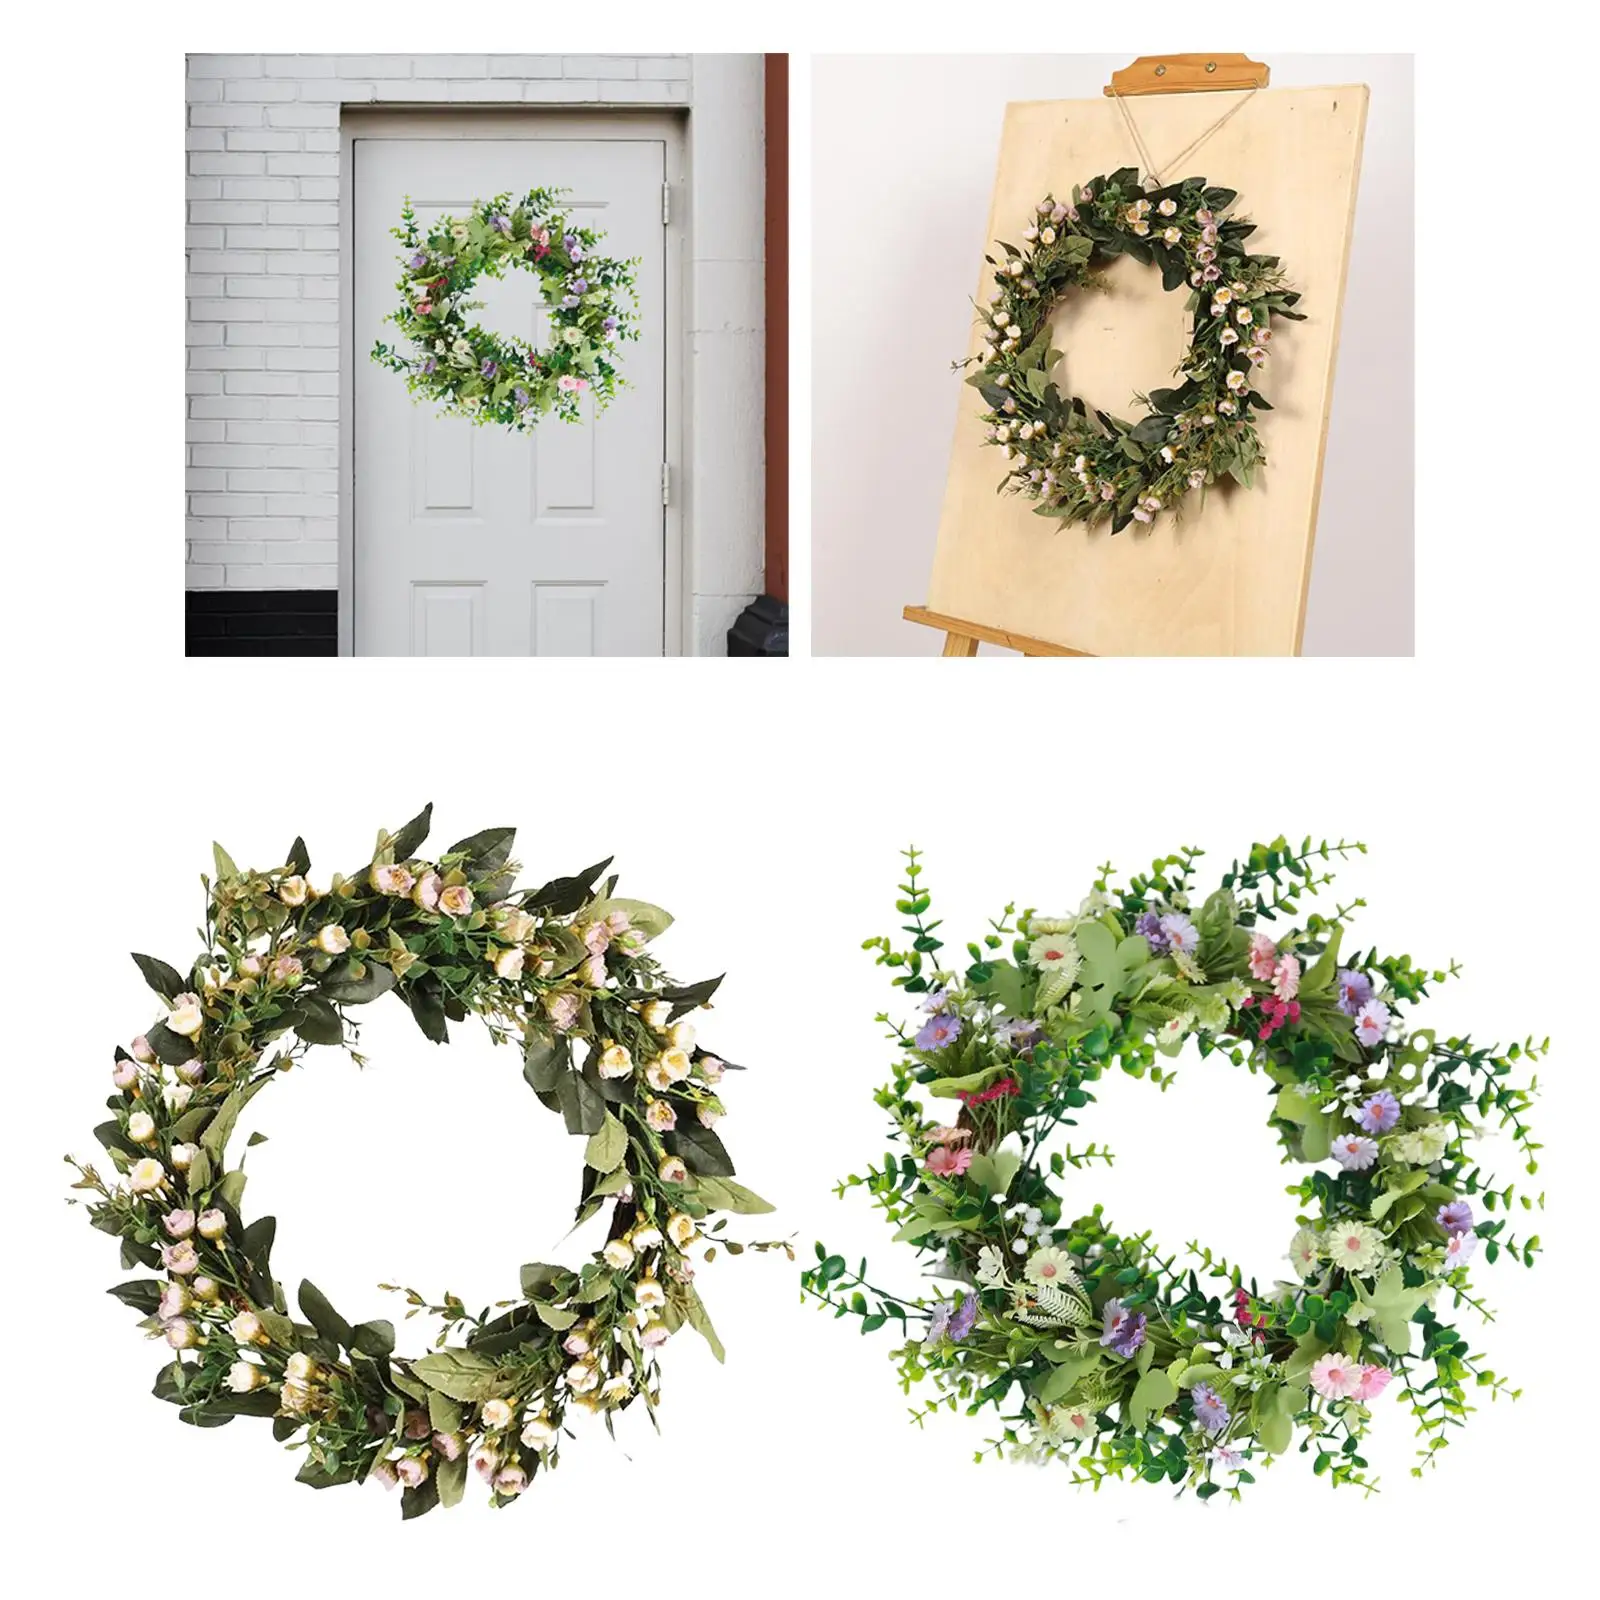 2x Handmade Flower Wreath Spring Garland Home Decor Door Wreath for Party Valentines Home Office Photo Props Decorations